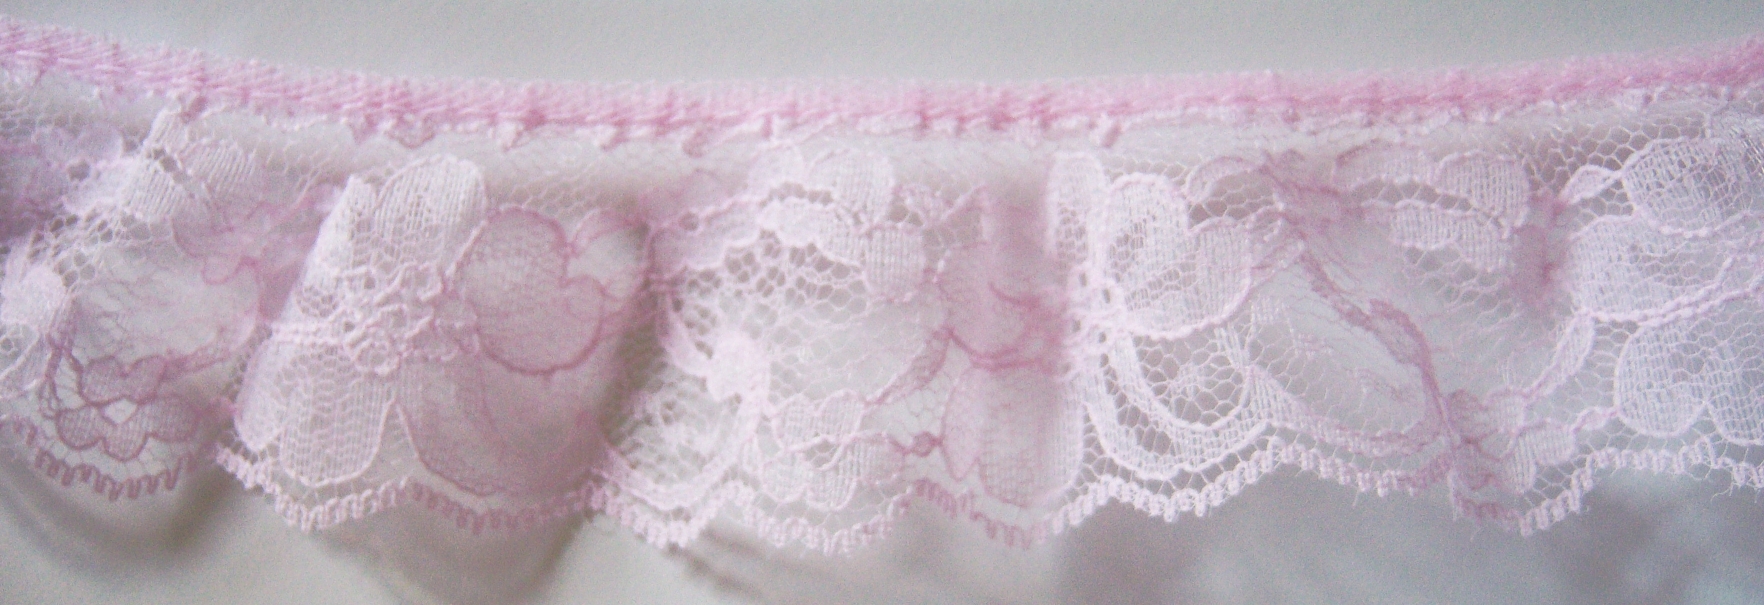 Lt Pink 1 7/8" Ruffled Lace